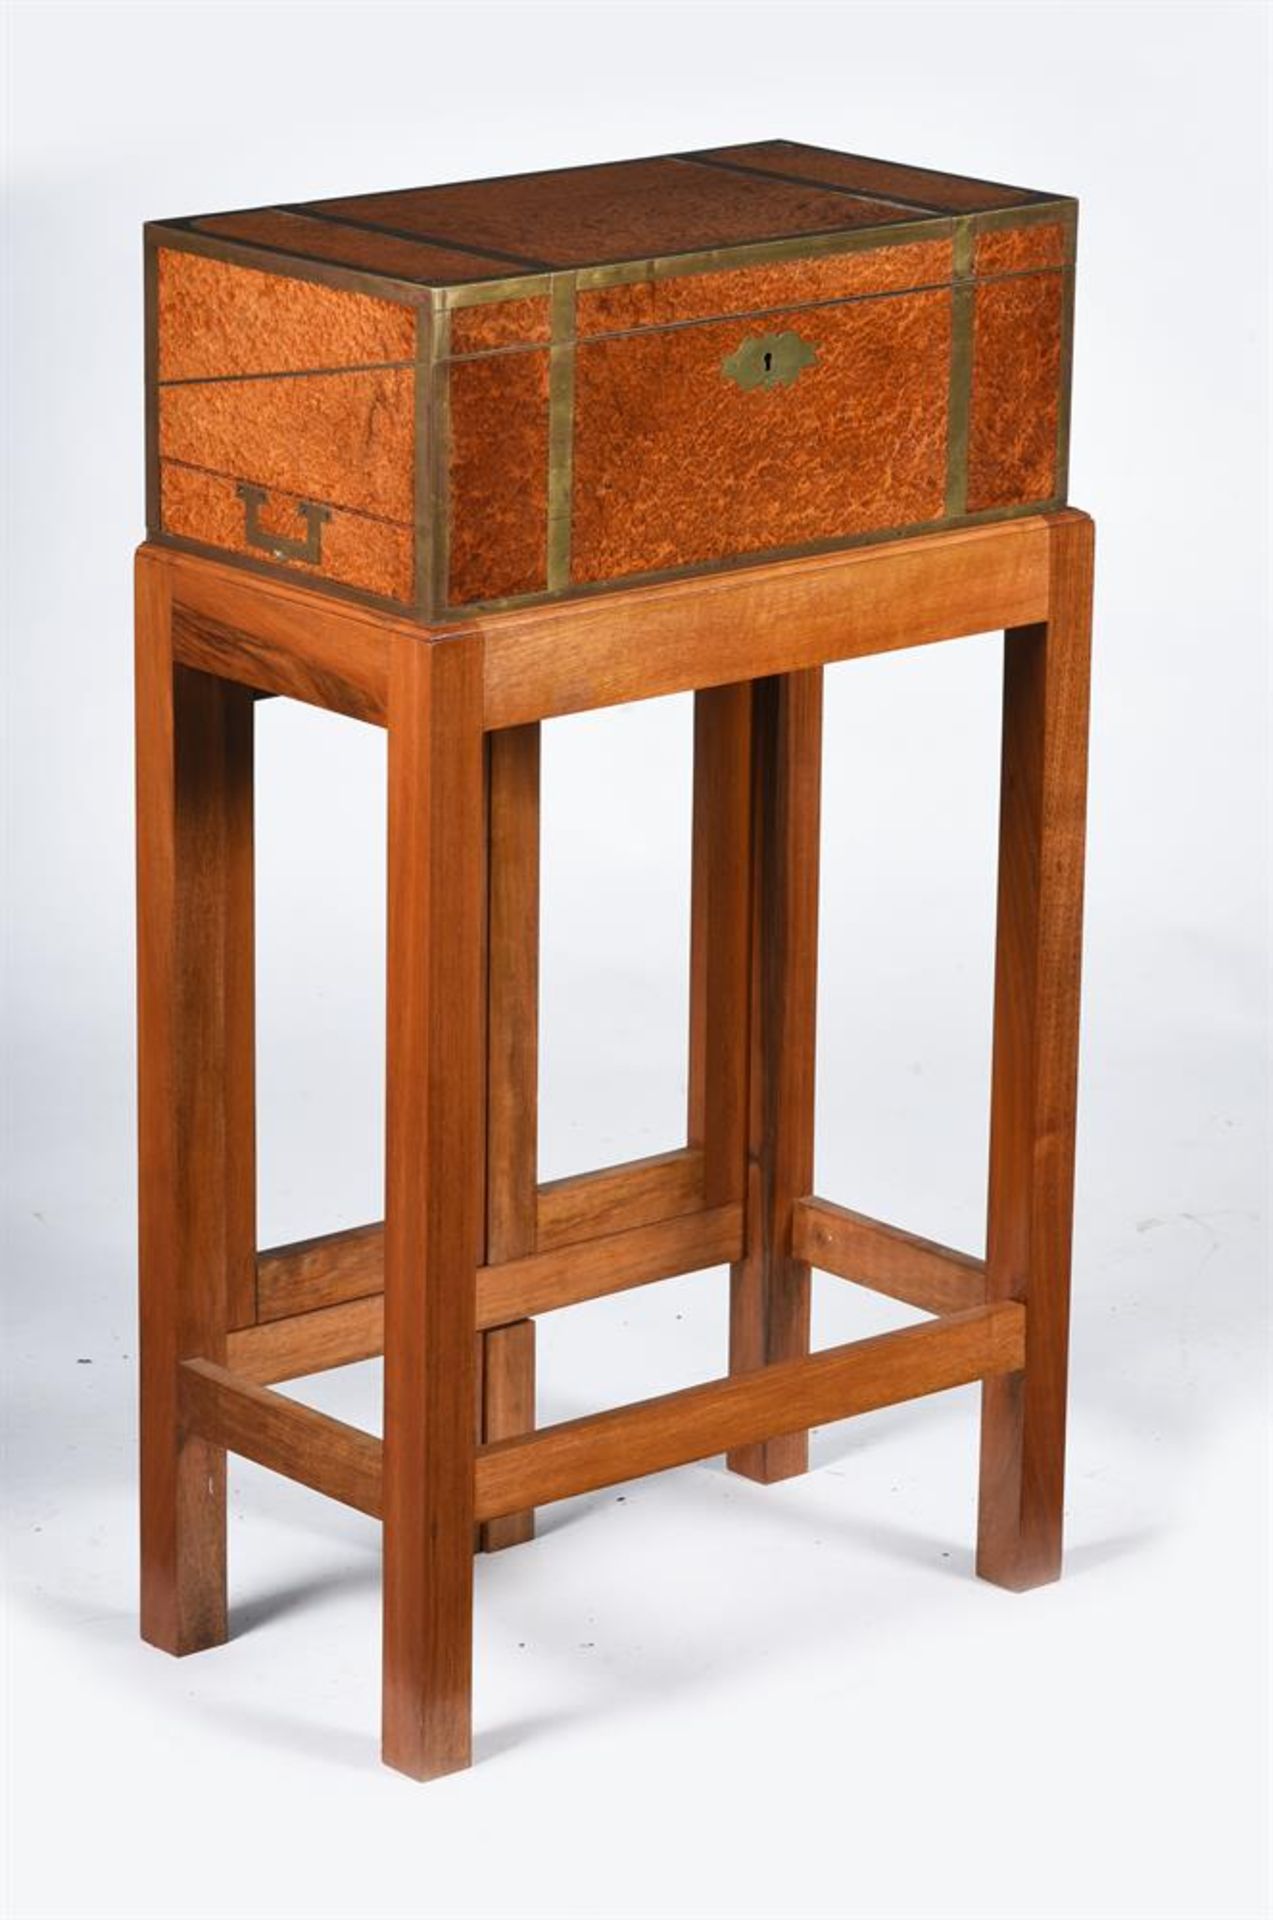 AN ANGLO CHINESE BURR EXOTIC HARDWOOD WRITING BOX, WITH A LATER WALNUT STAND, CIRCA 1830 - Image 3 of 4